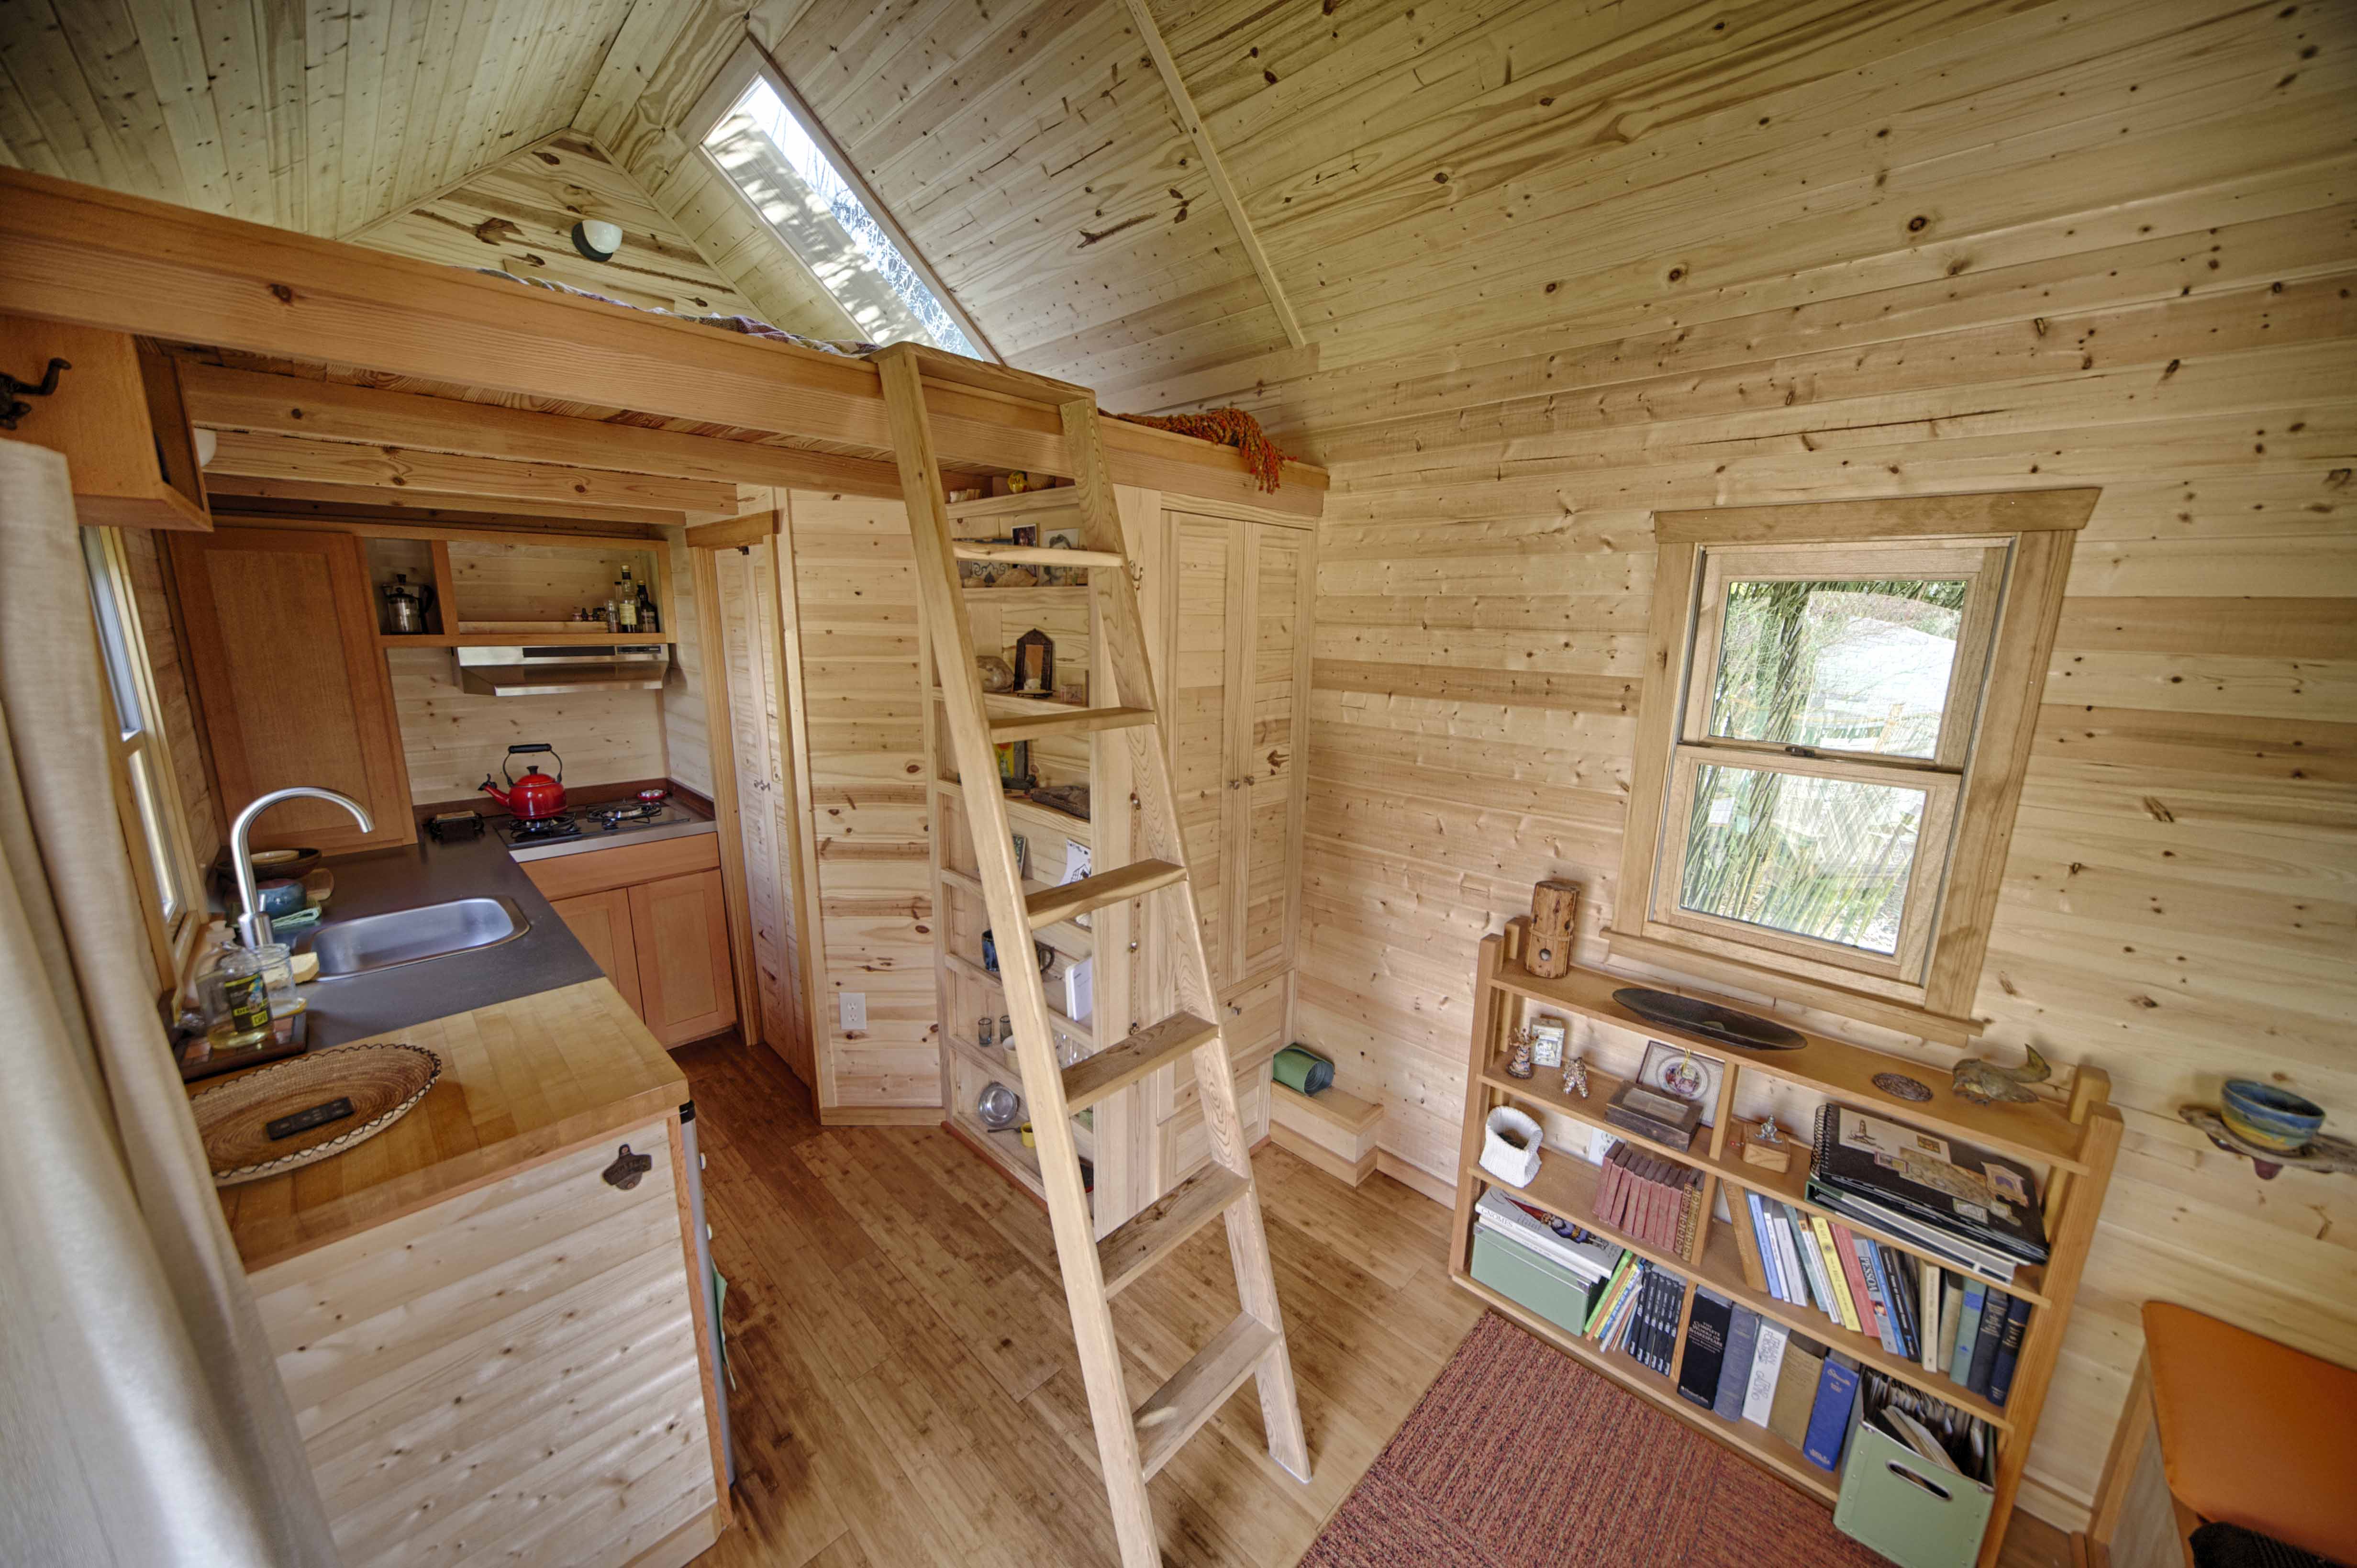 The Sweet Pea Tiny House Plans - PADtinyhouses.com